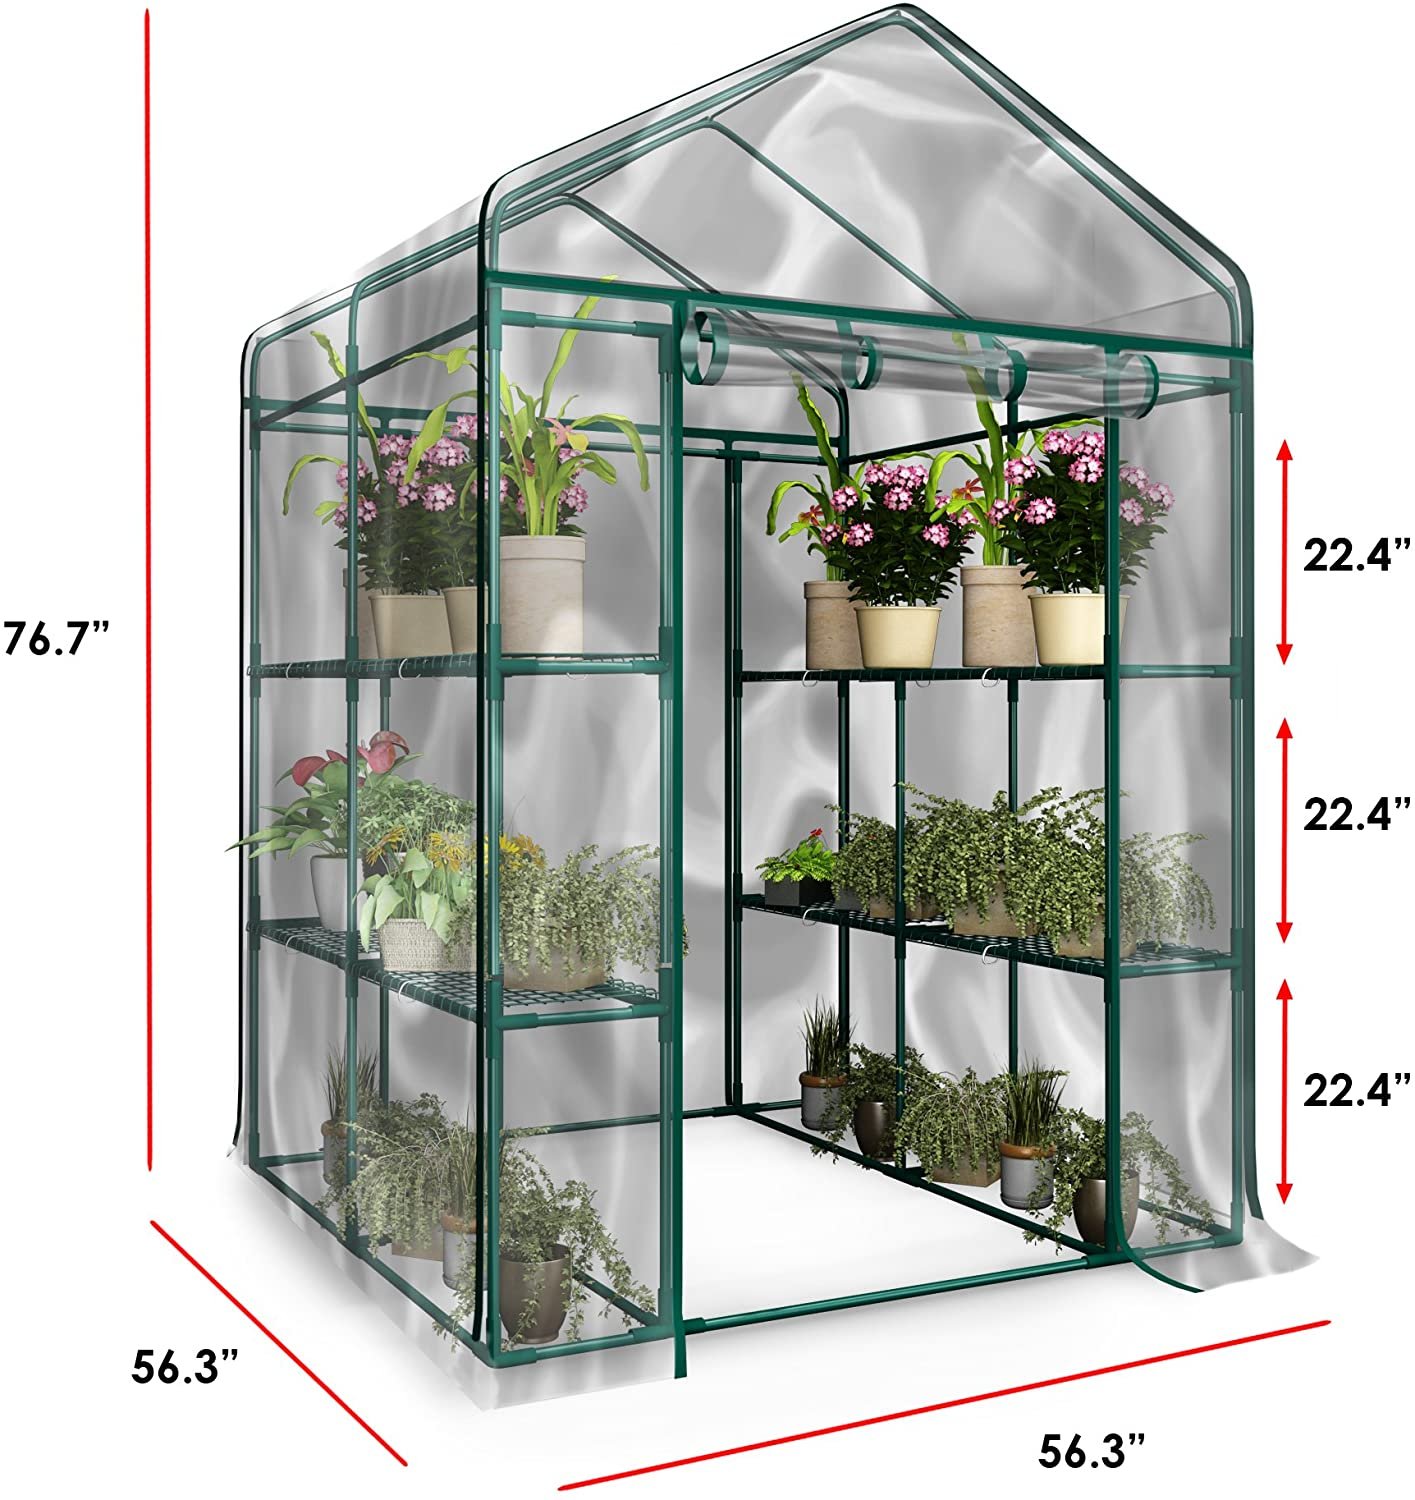 How To Control The Humidity Level In A Greenhouse?